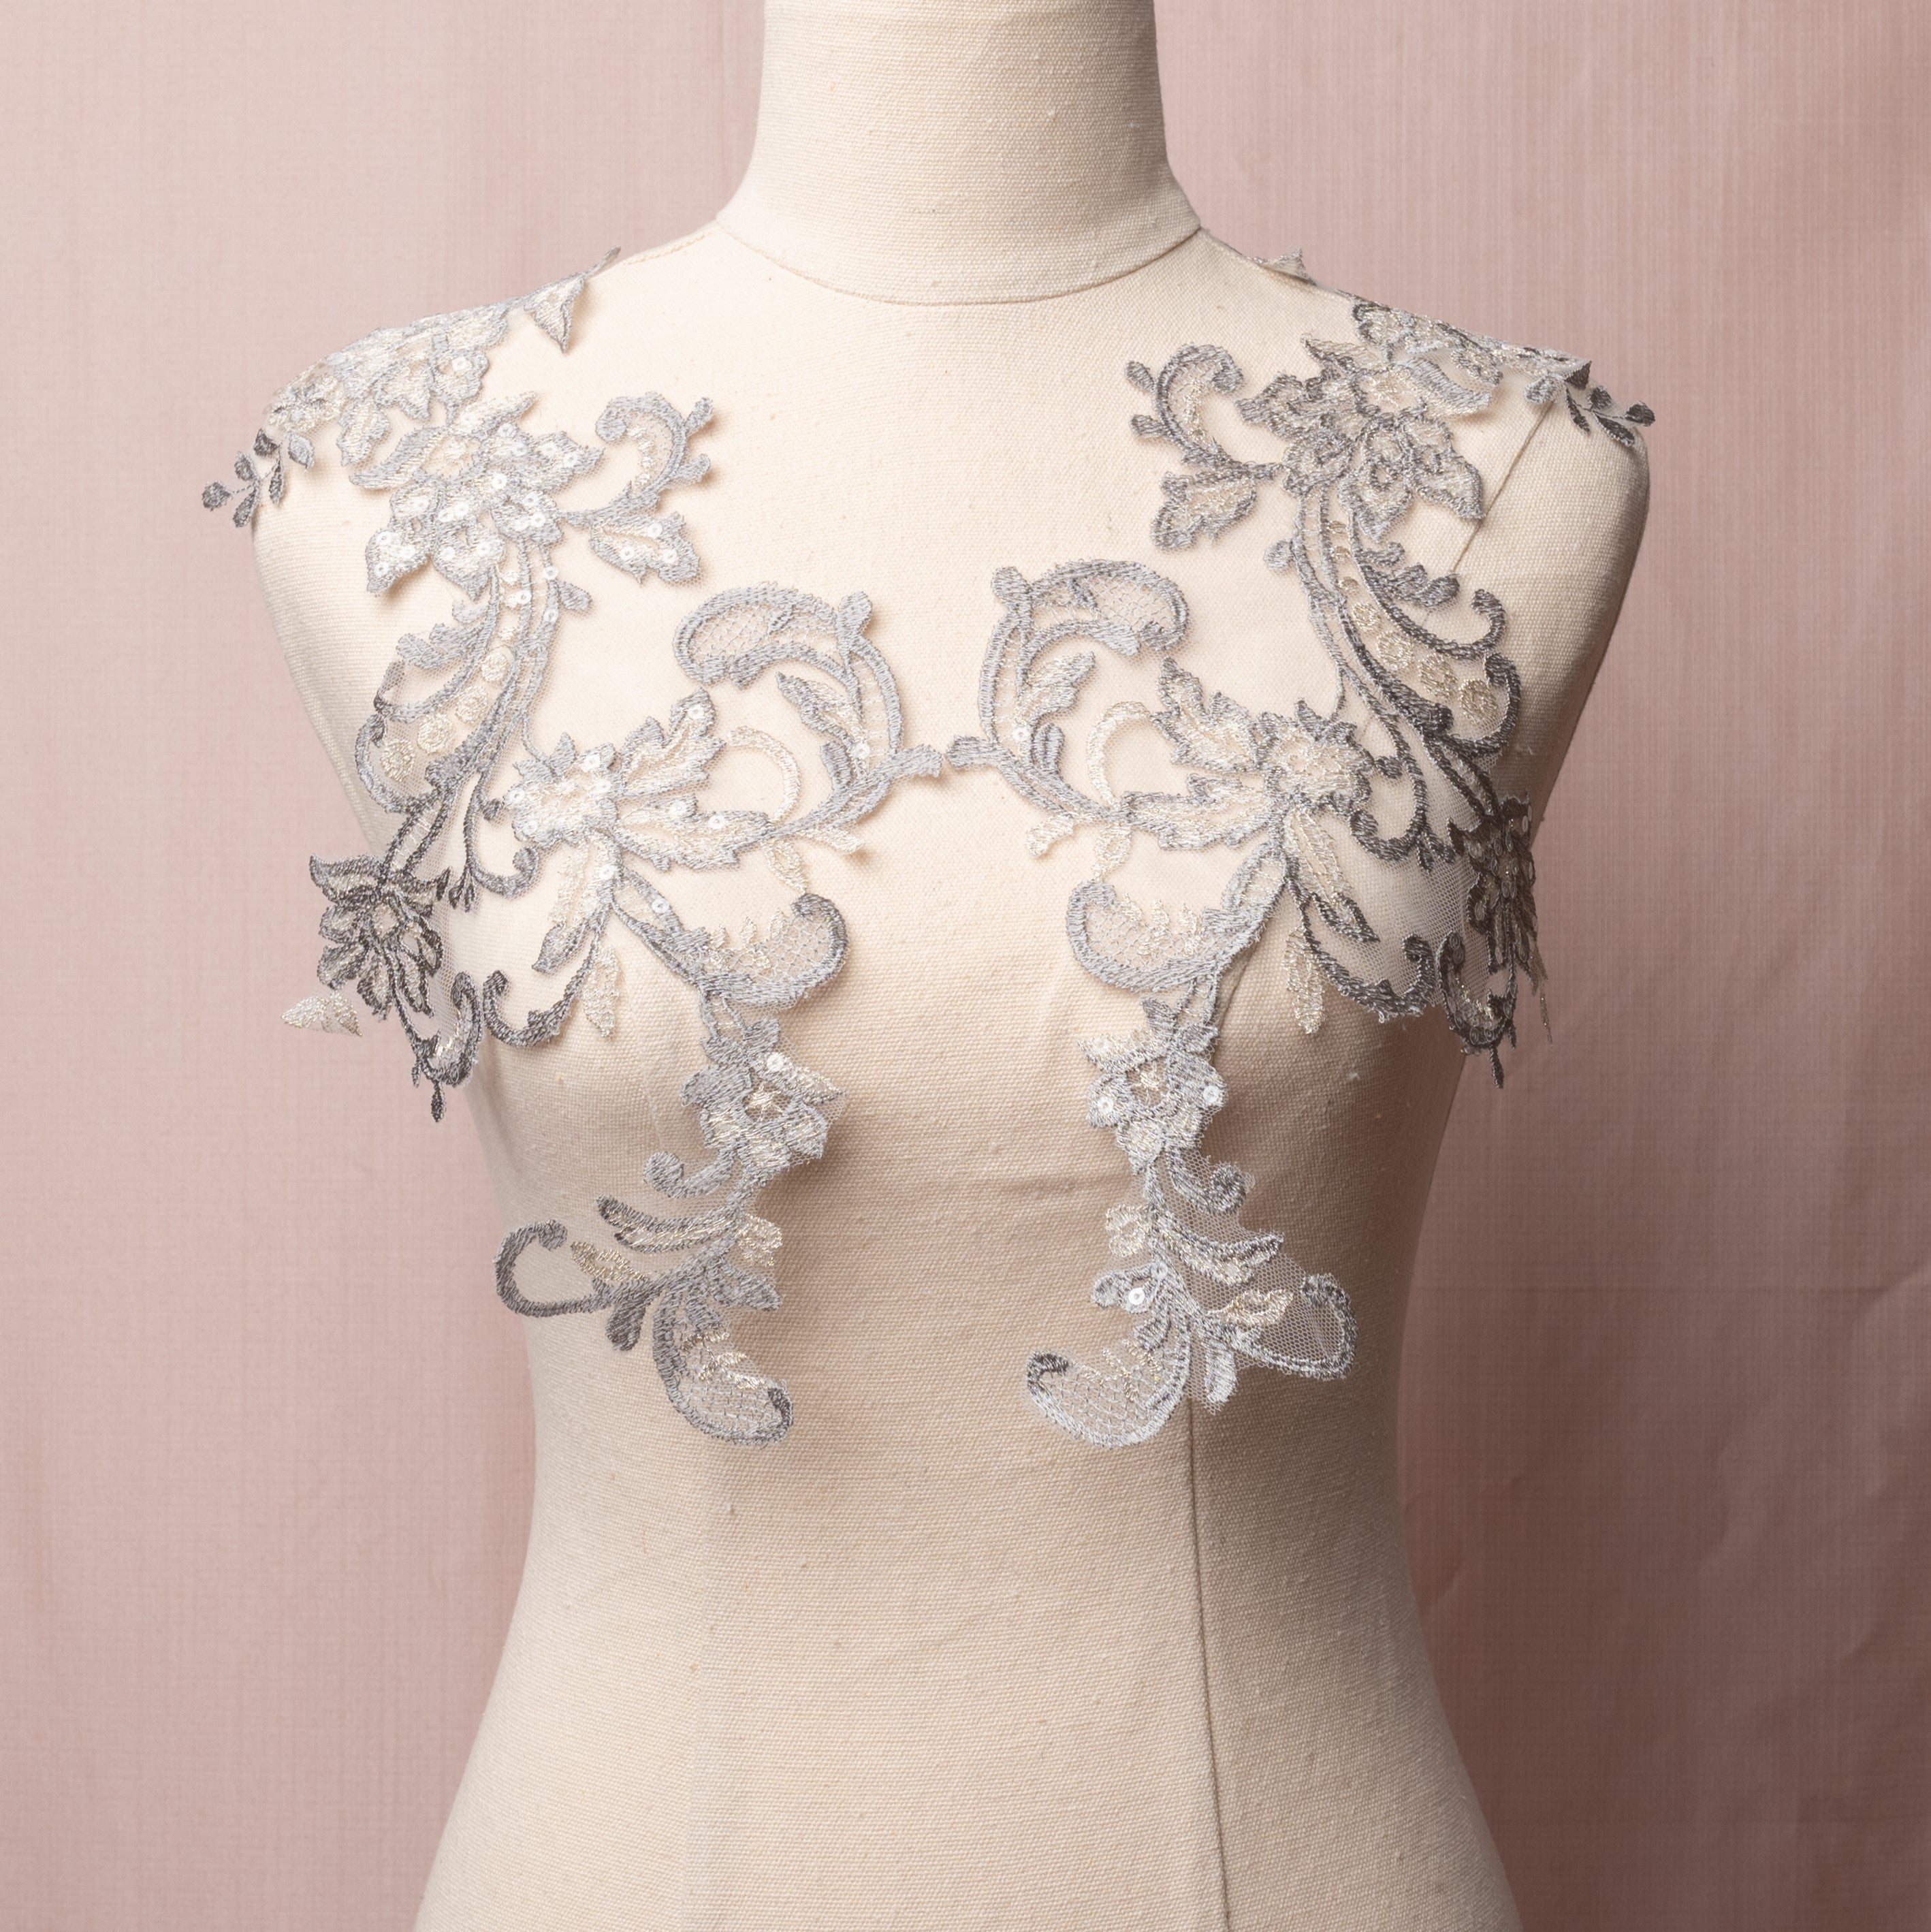 A delicate grey floral applique highlighted with silver thread on the leaves and flower petals.  The applique is embroidered onto a very fine net and sprinkled with clear sequins.   The appliques are displayed on a mannequin.